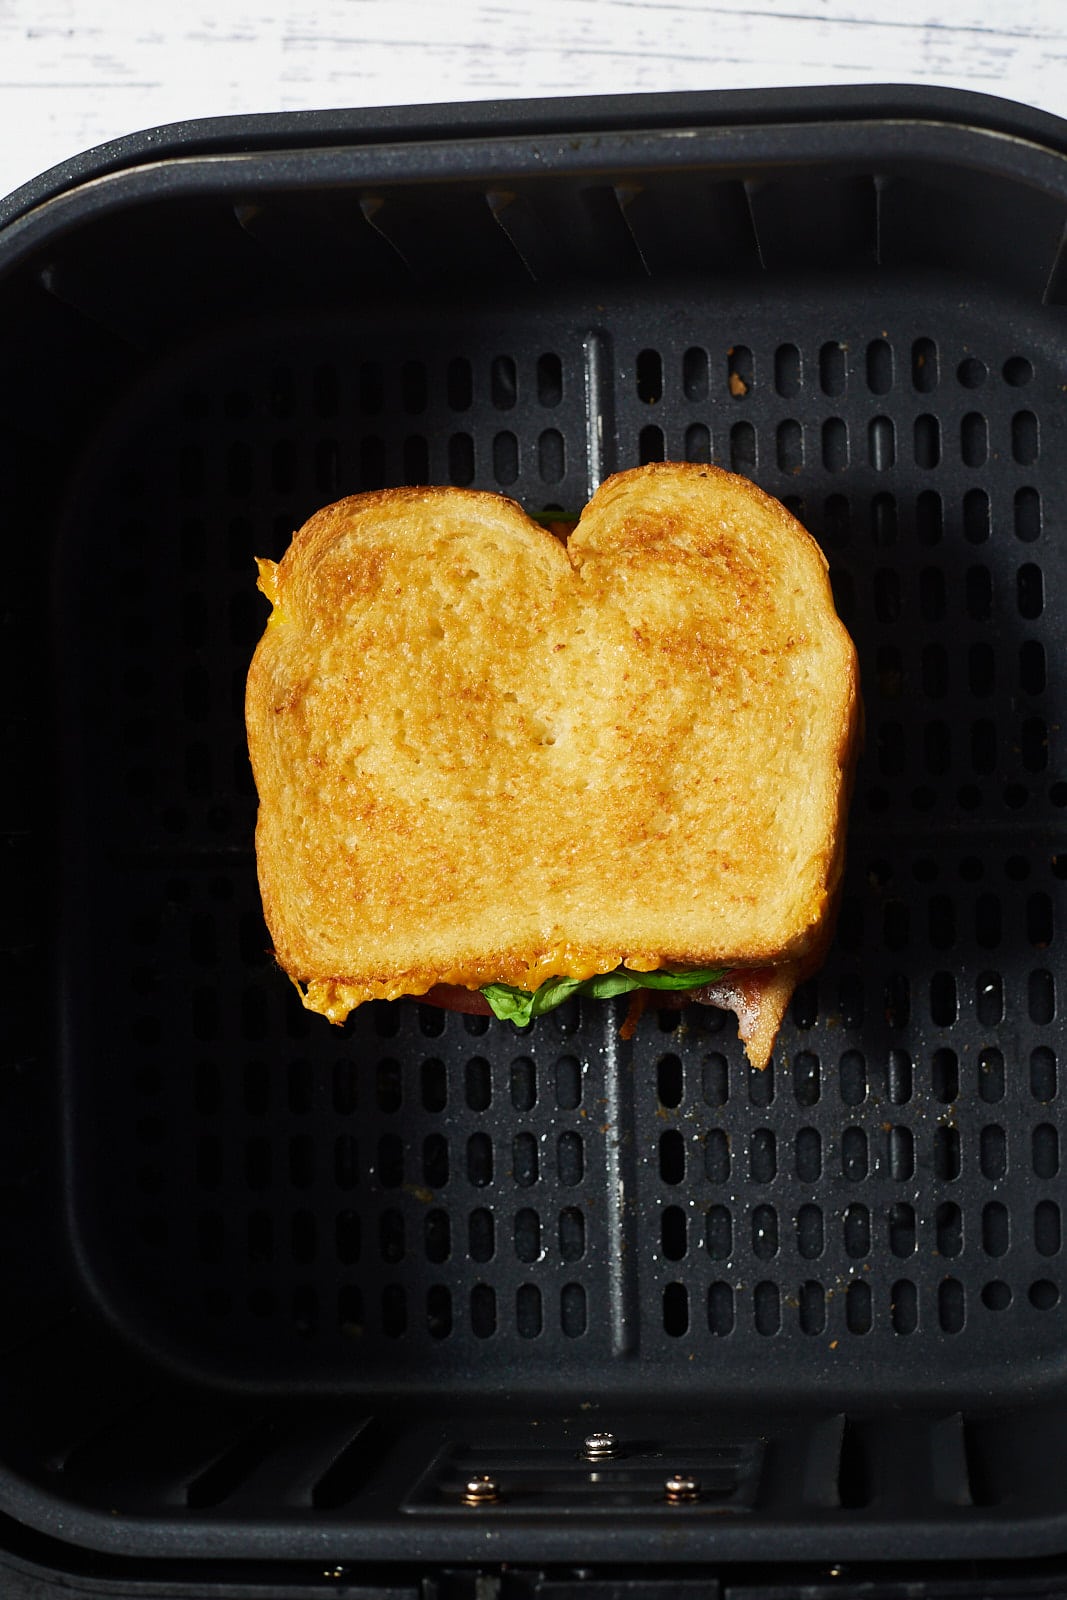 A BLT grilled cheese sandwich in the air fryer.